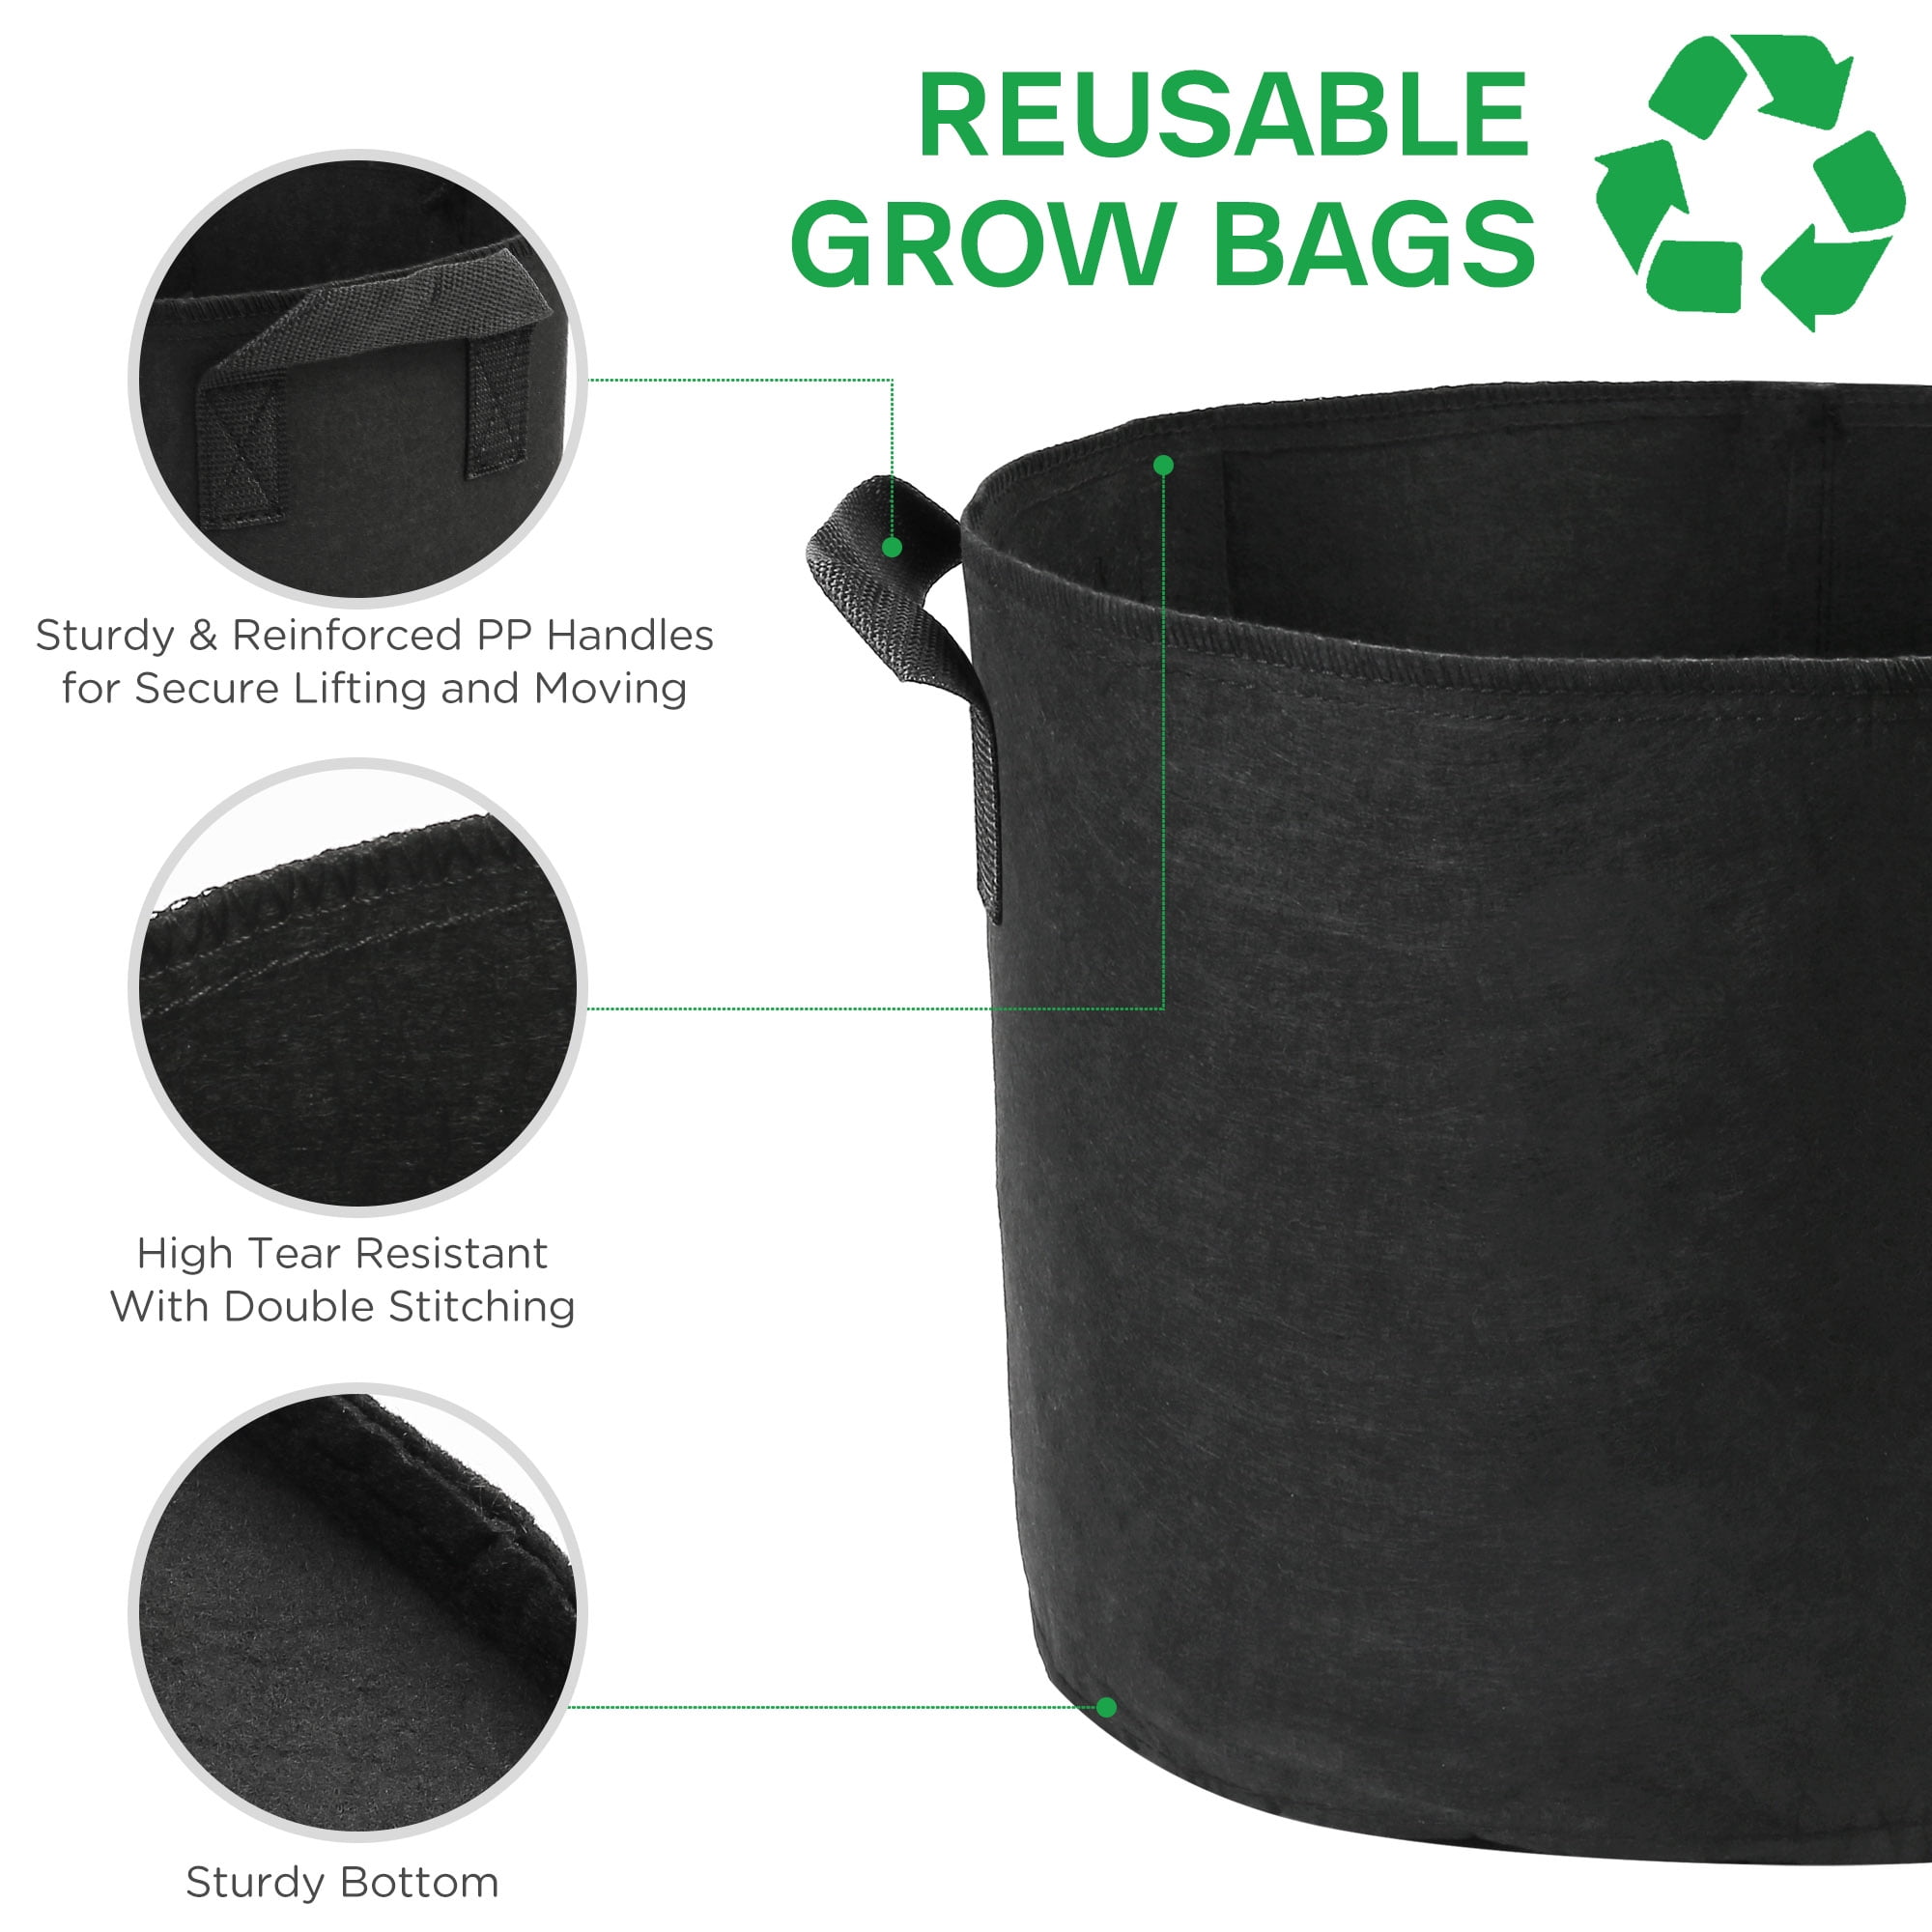 Non Woven Fabric Pots 5-Pack 5 7 10 20 100 Gallon 300g Thickened Fabric  Garden Pots Felt Plant Grow Bag - China Plant Bag and Plant Nursery Bag  price